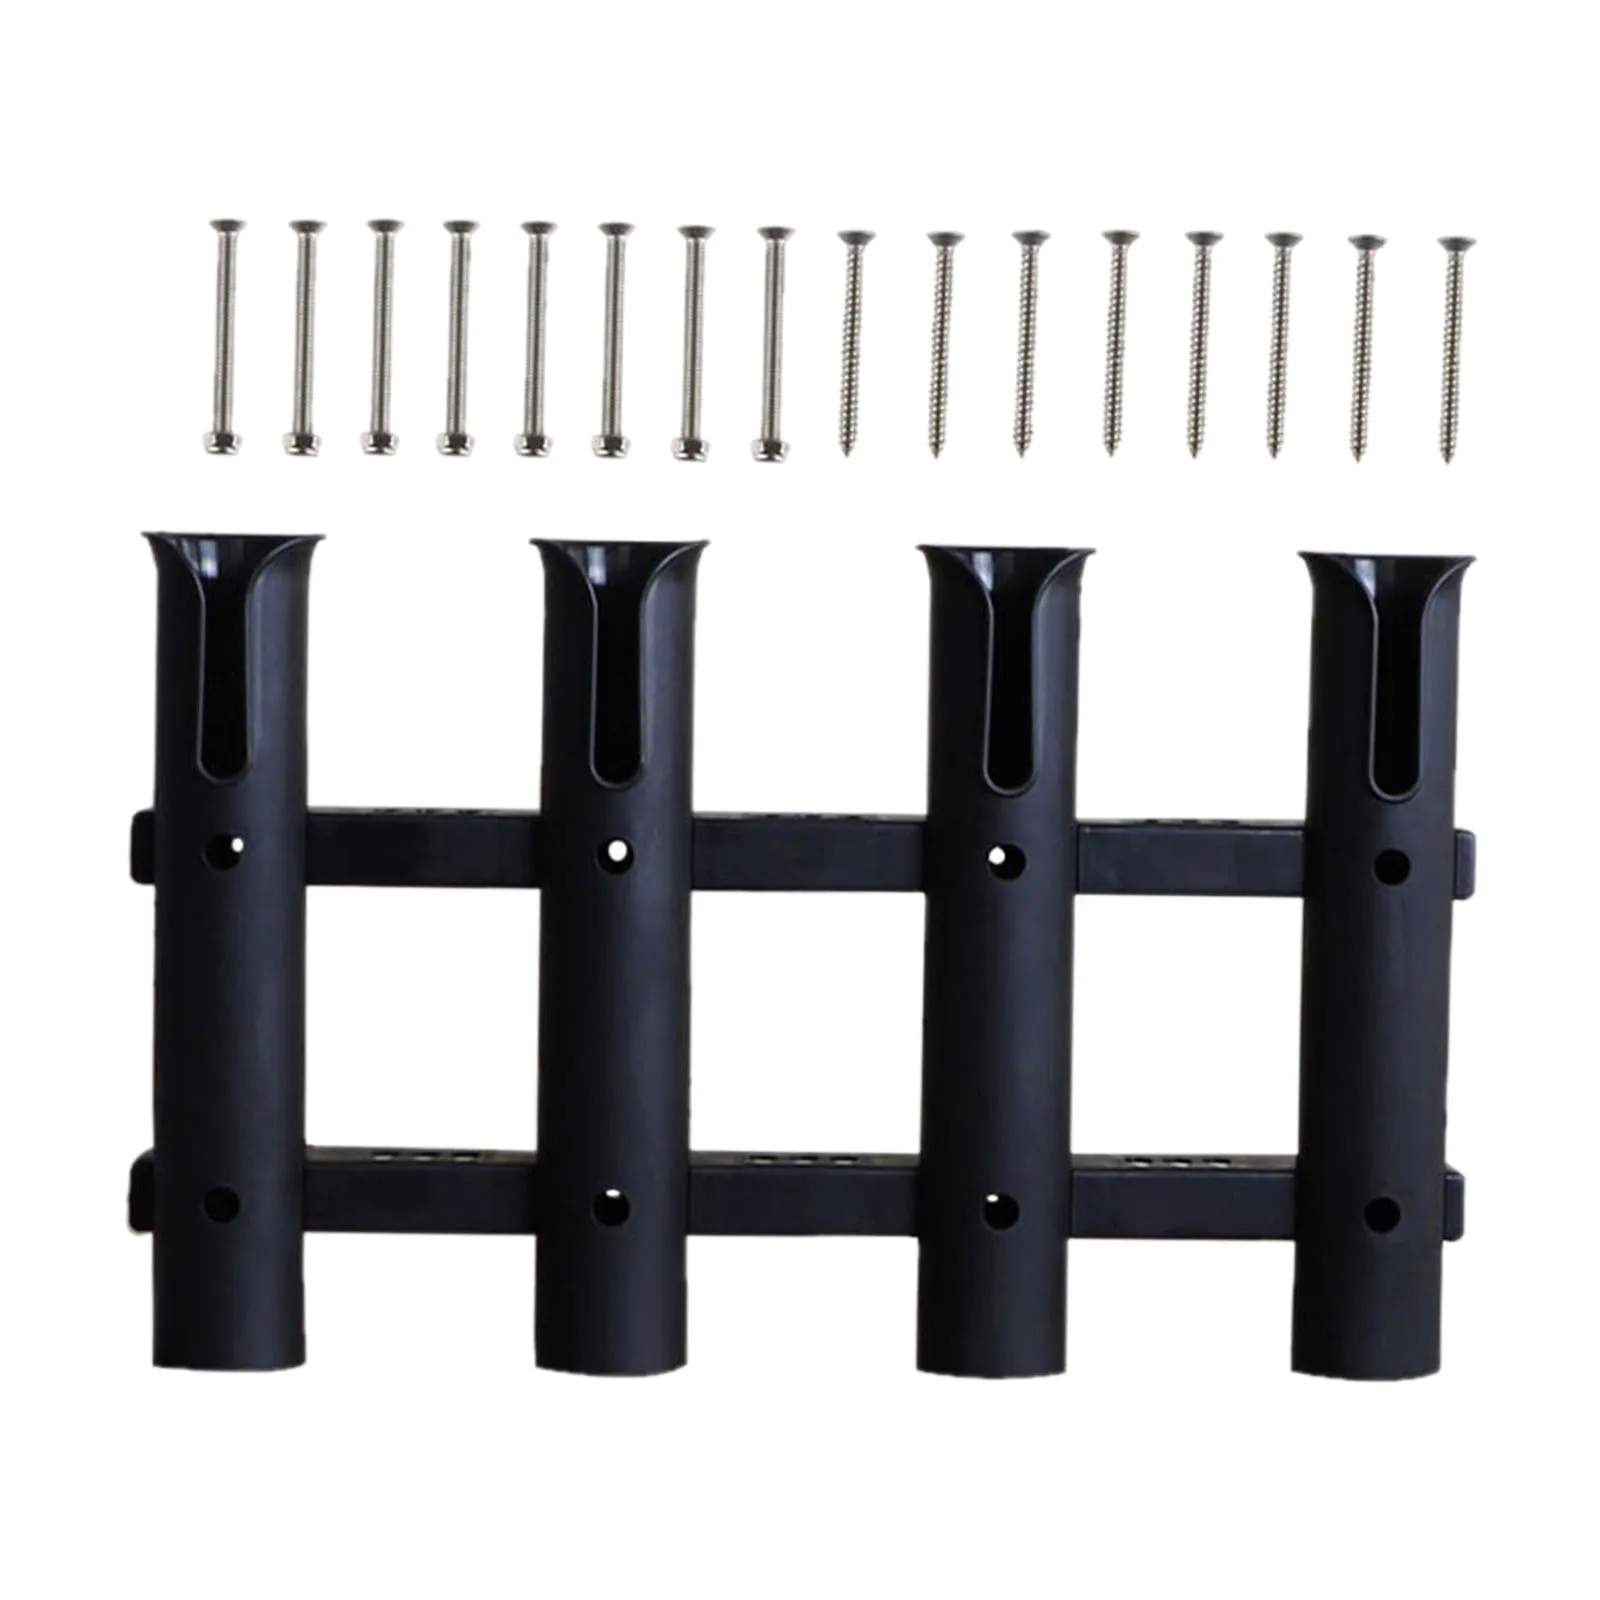 FISHING ROD POLE RACK X 4 WHITE  s/s SCREWS  EASY TO FIT  BOAT SAIL FISHING 